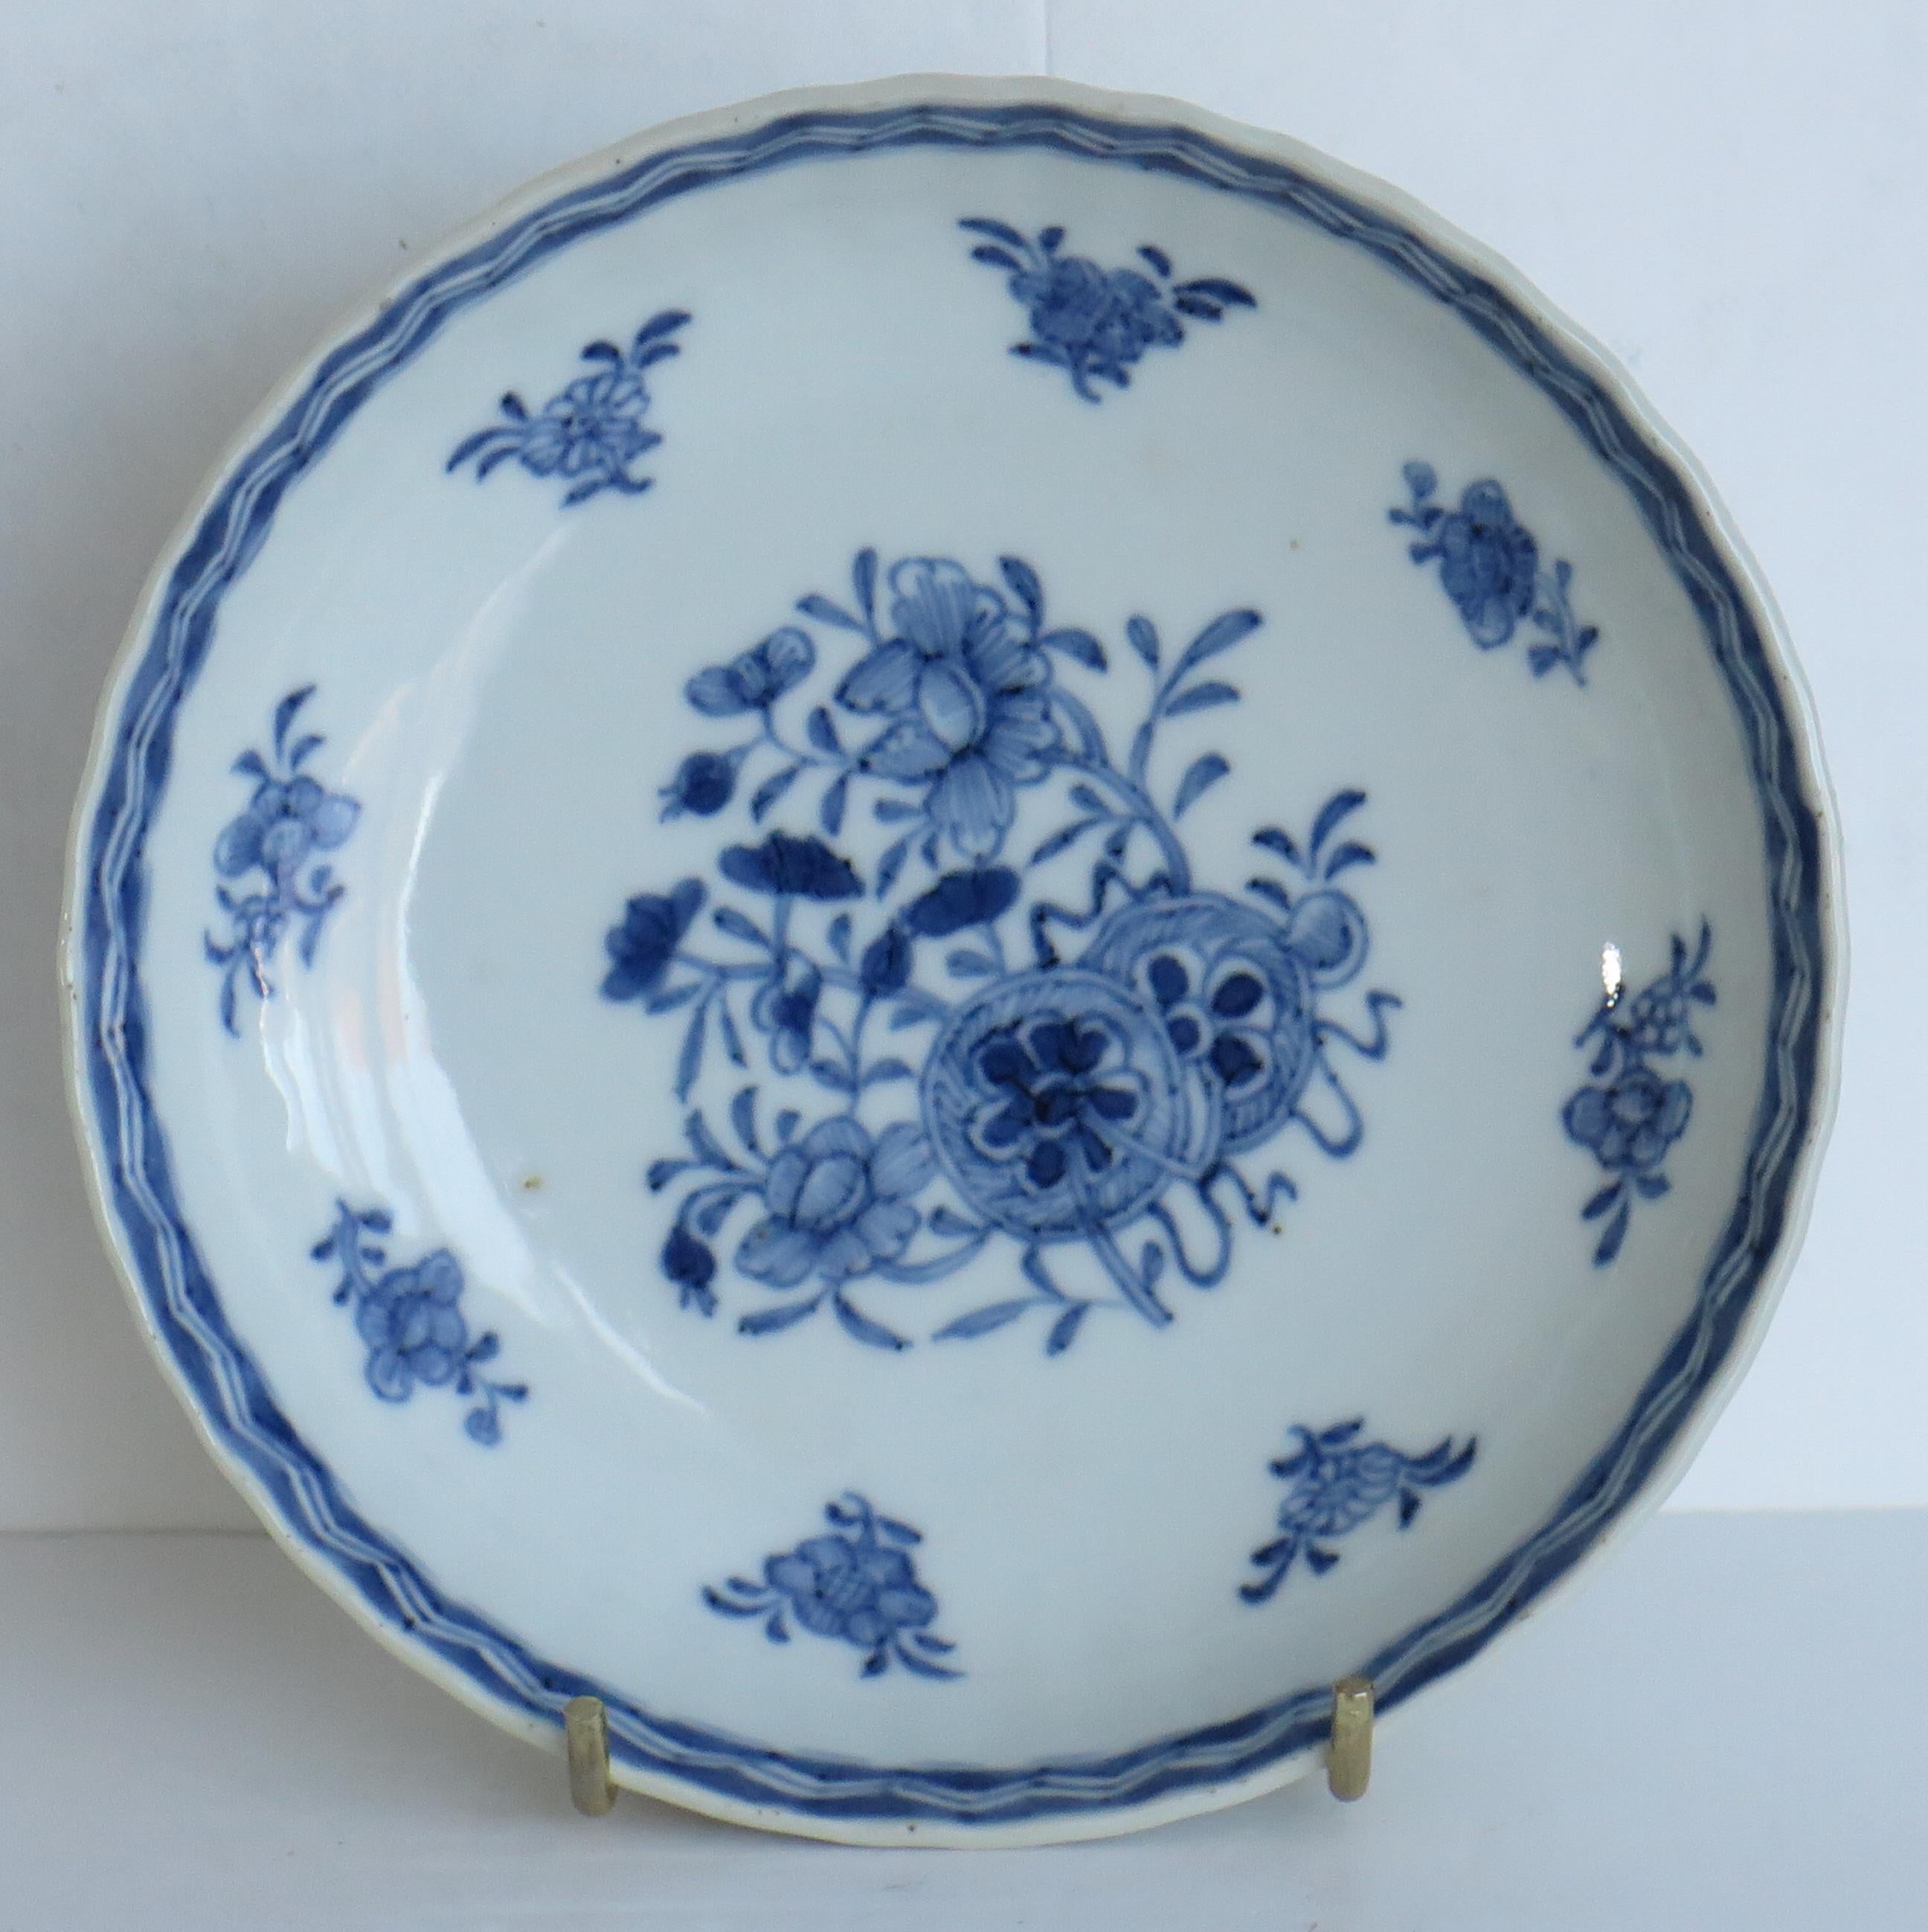 This is a beautifully hand-painted Chinese porcelain Dish, dating to the middle of the 18th century, Qing, Qianlong period, circa 1750.

The dish is circular, well potted, with ribbed sides and a lovely glassy light blue glaze and neatly cut foot